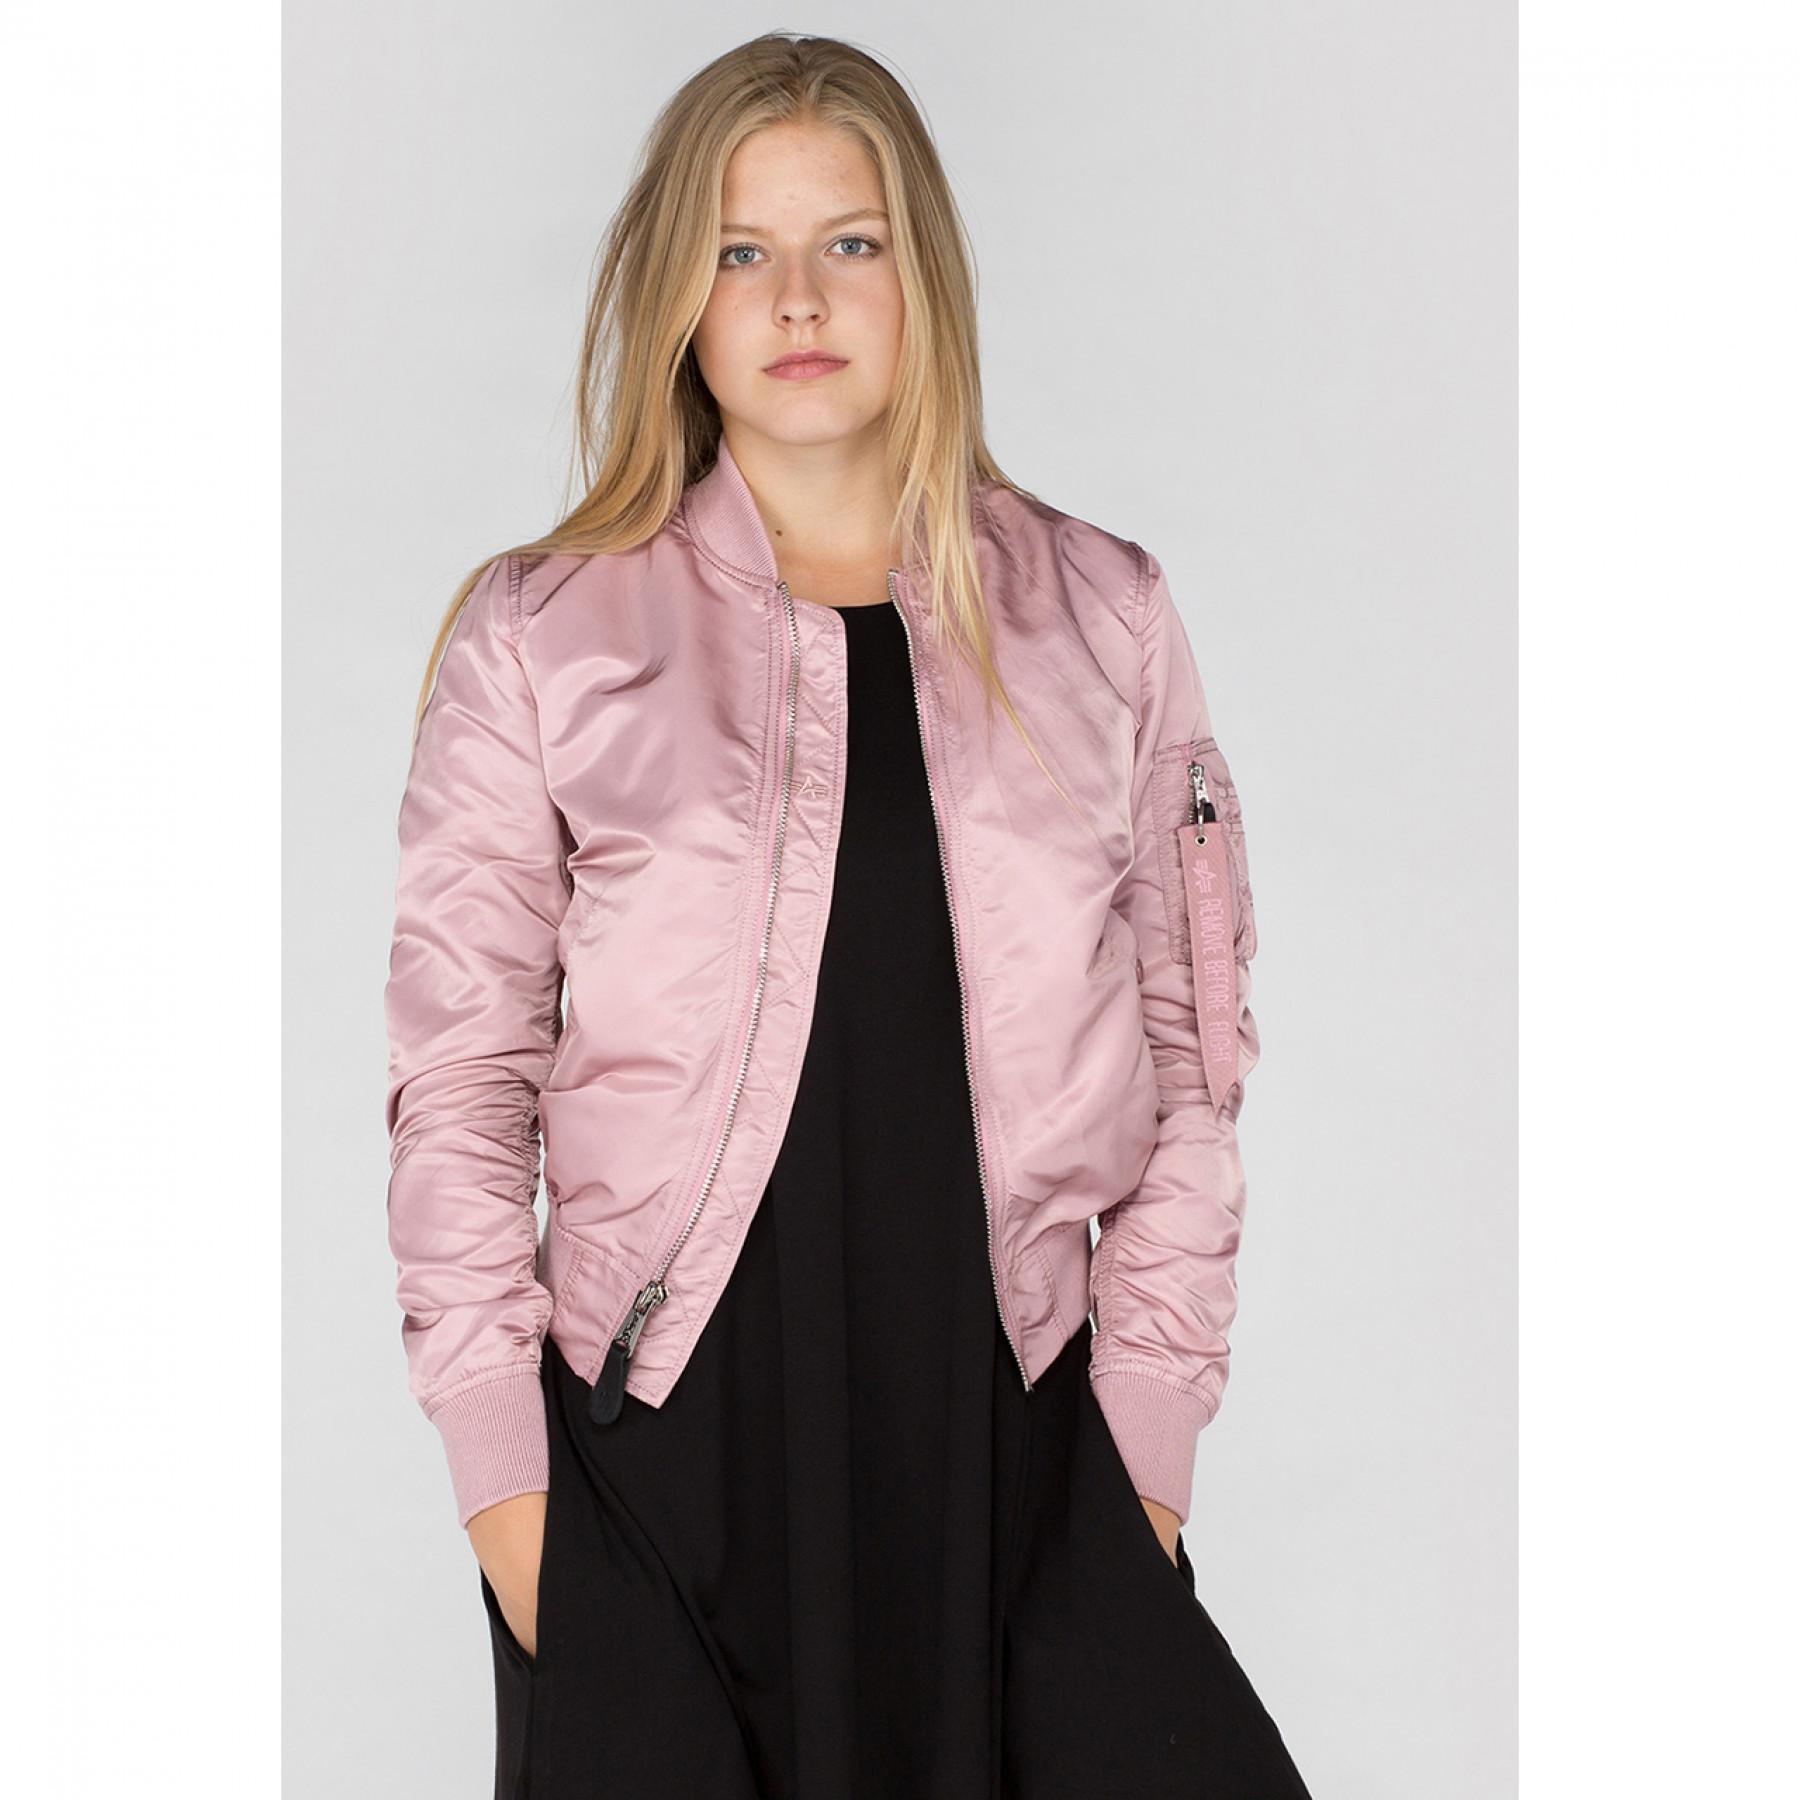 Women's bomber Alpha Industries MA-1 VF LW - Coats and Jackets - Woman -  Lifestyle